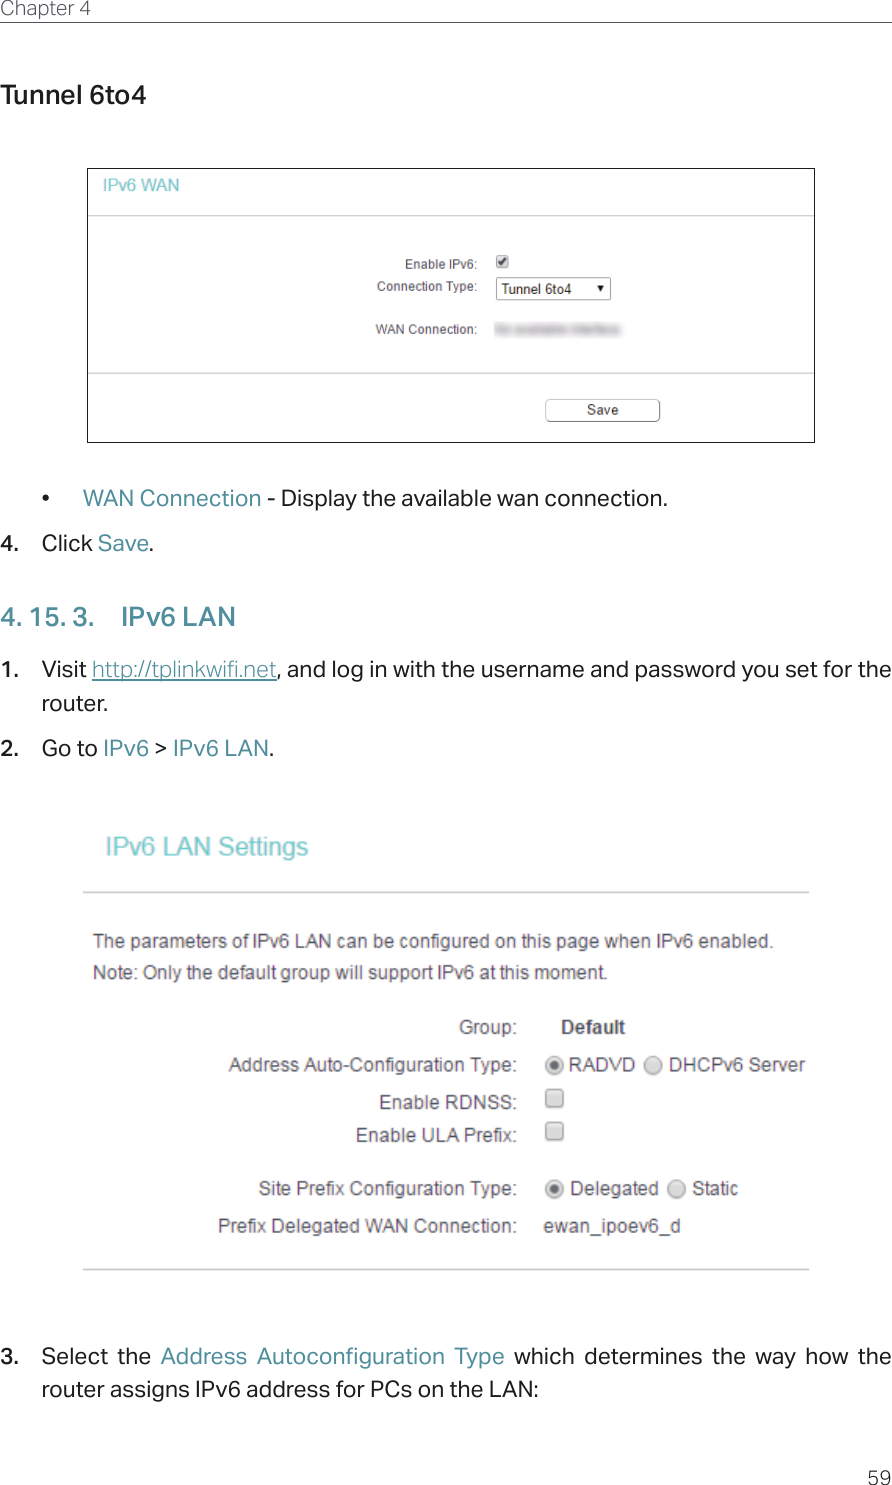 59Chapter 4  Tunnel 6to4  •  WAN Connection - Display the available wan connection.4.  Click Save.4. 15. 3.  IPv6 LAN1.  Visit http://tplinkwifi.net, and log in with the username and password you set for the router.2.  Go to IPv6 &gt; IPv6 LAN.3.  Select the Address Autoconfiguration Type which determines the way how the router assigns IPv6 address for PCs on the LAN: